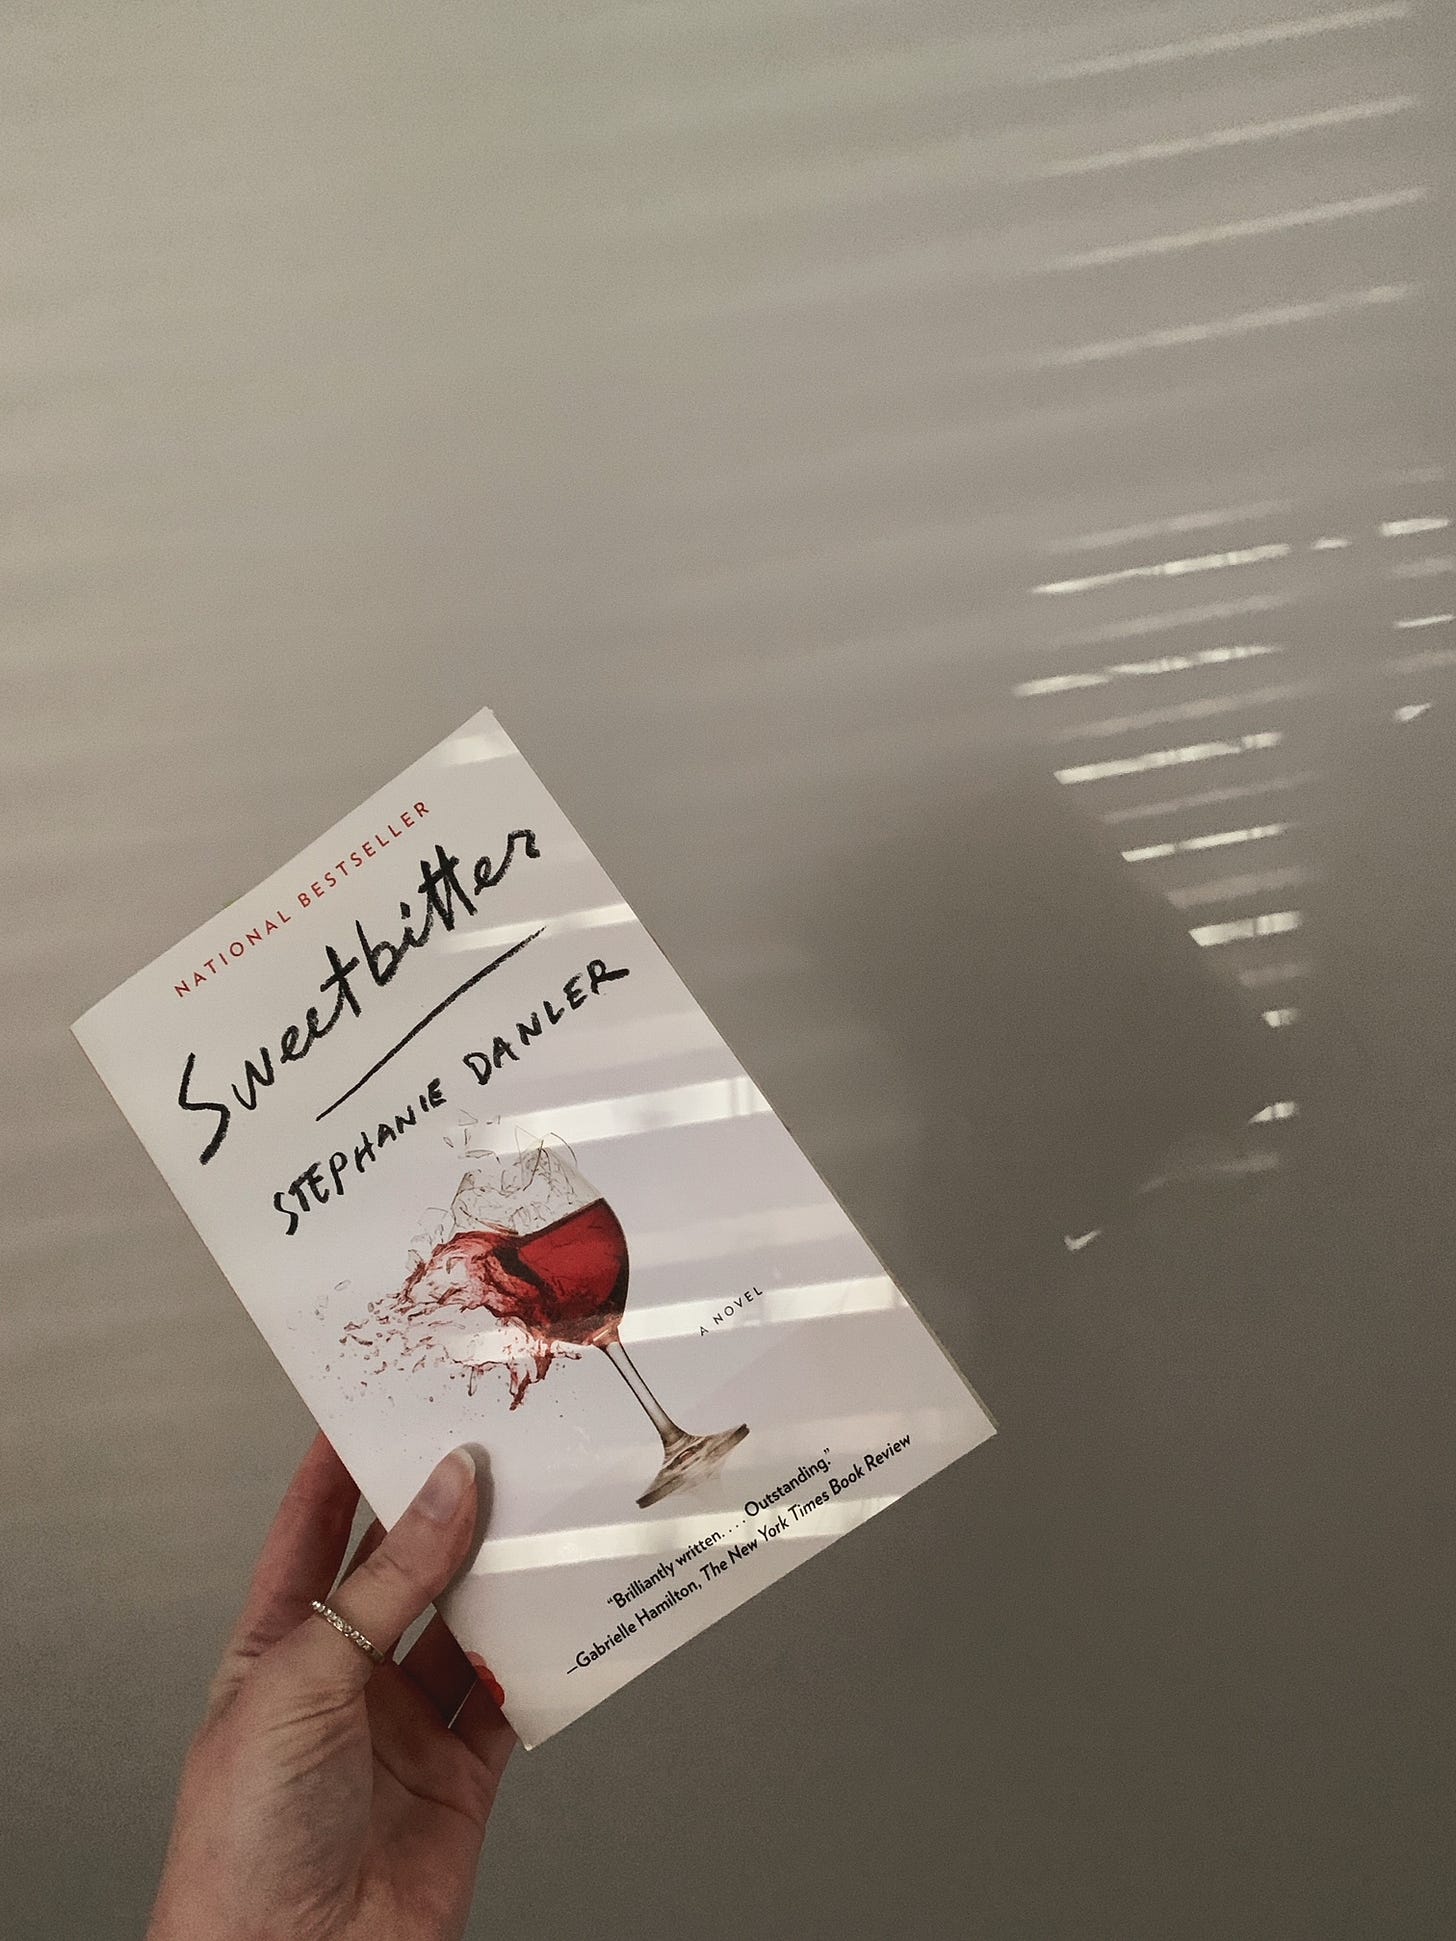 hand holding up a copy of Sweetbitter against a gray wall, with light and shadows streaming in.